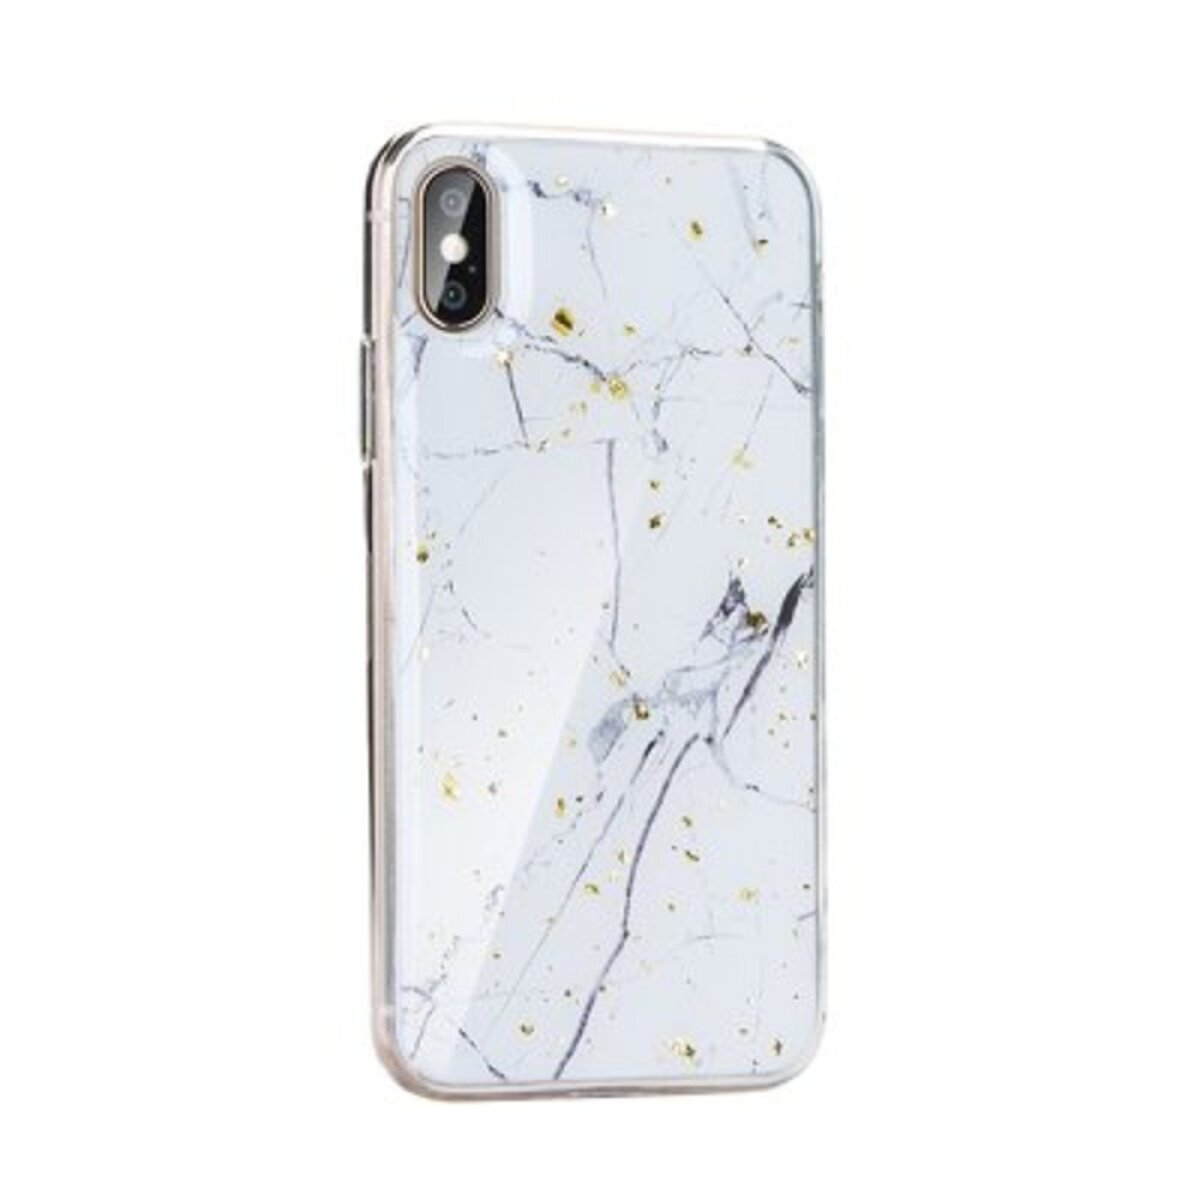 FORCELL MARBLE Case iPhone 11 Pro design available Max Bookcover, 1, iPhone Apple, Not 11 Max, Pro